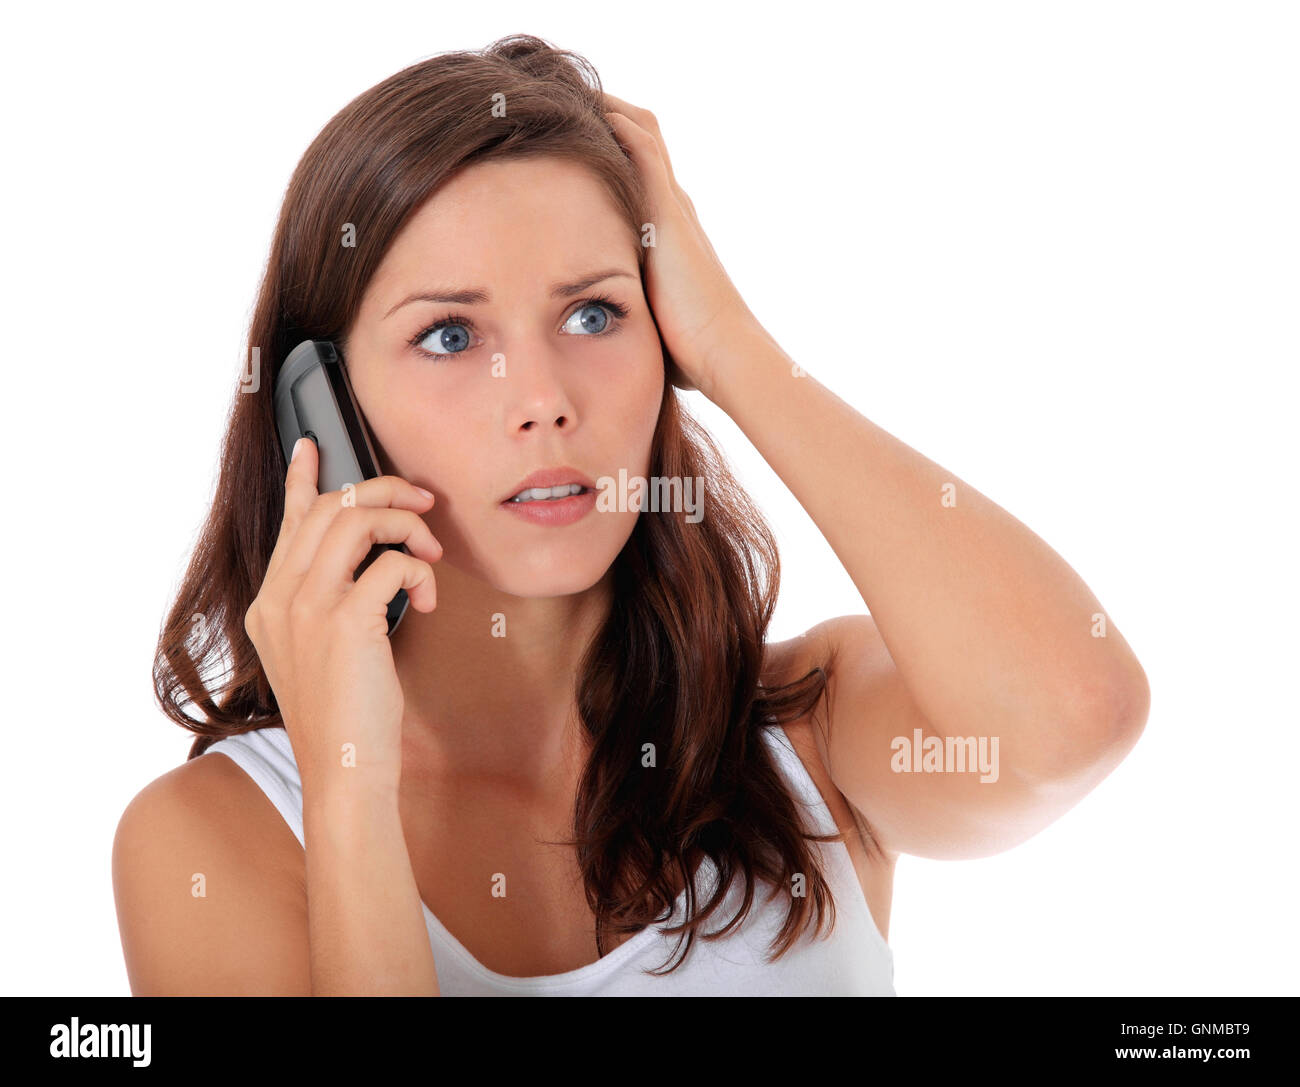 woman gets shocking news during phone call Stock Photo